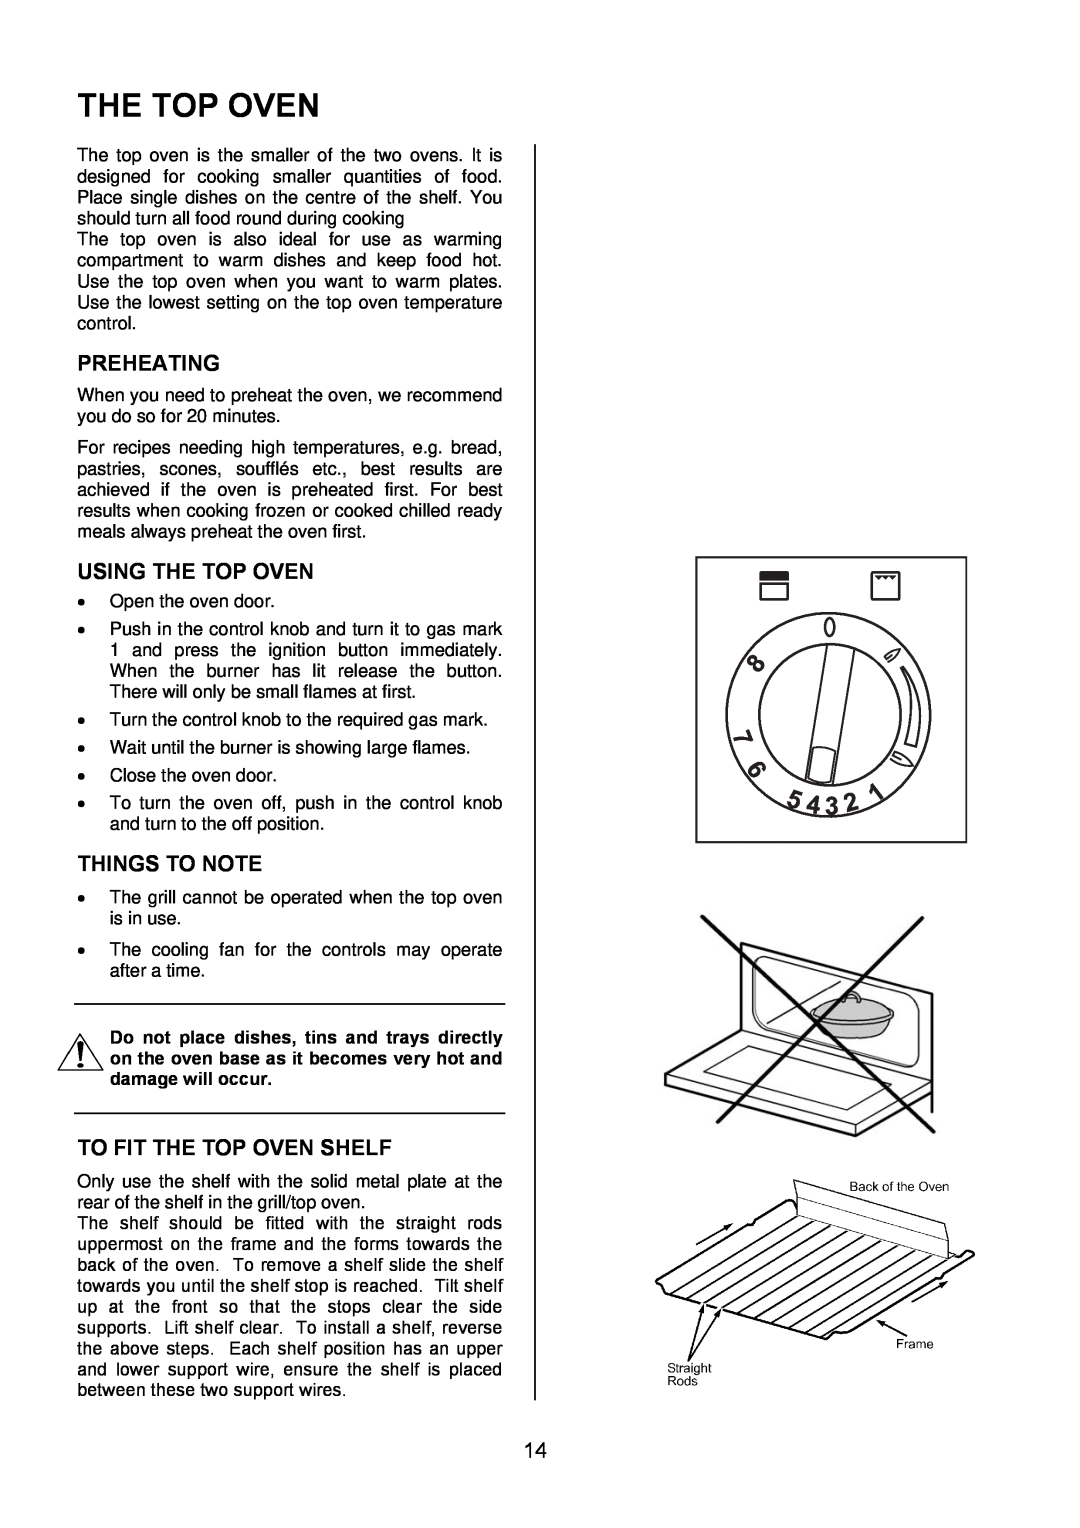 Electrolux EIKG6047, EIKG6046 user manual Preheating, Using The Top Oven, To Fit The Top Oven Shelf, Things To Note 